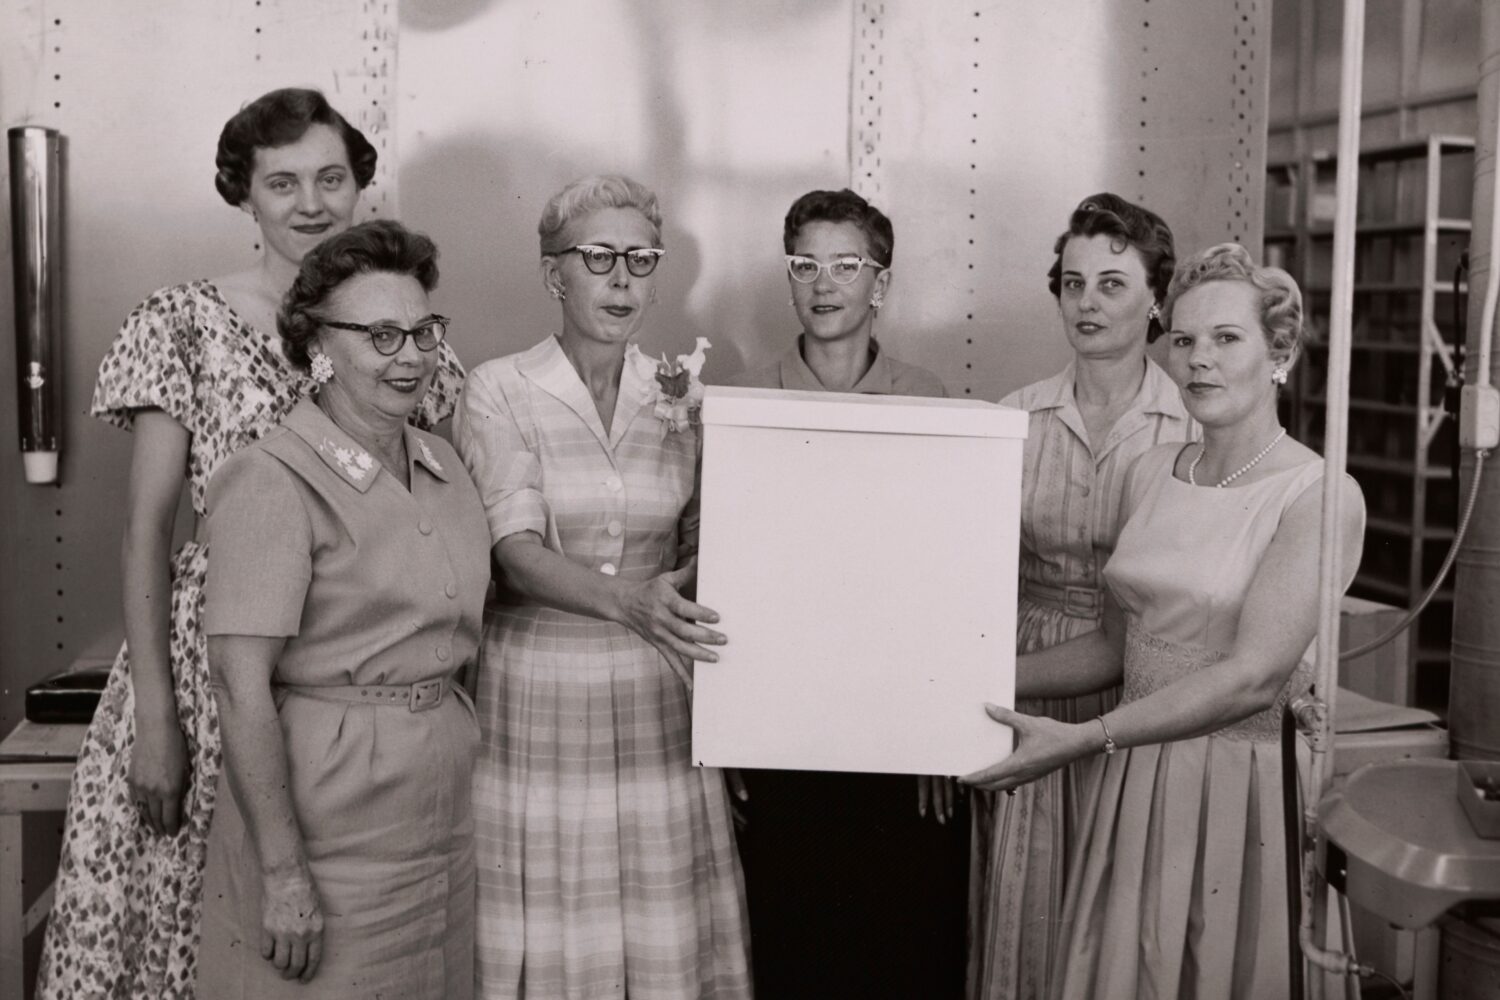 Photo of several women gathered at a celebration and two women holding a large white box.